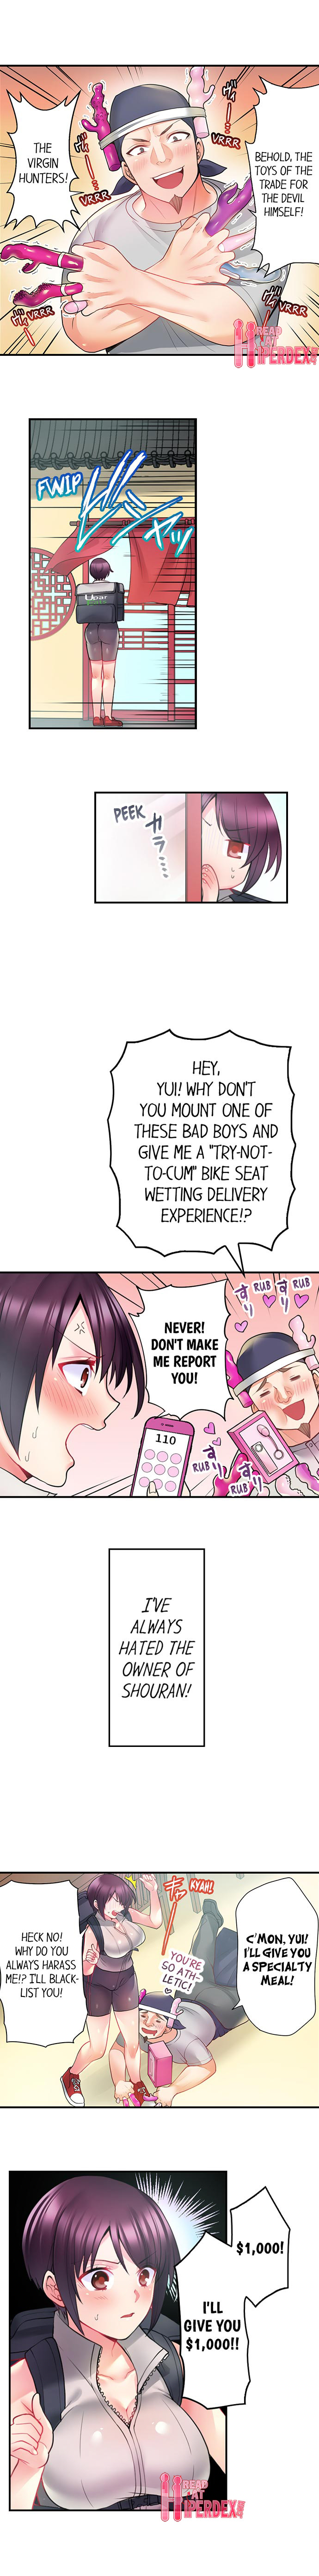 Bike Delivery Girl, Cumming To Your Door! - Chapter 1 Page 4